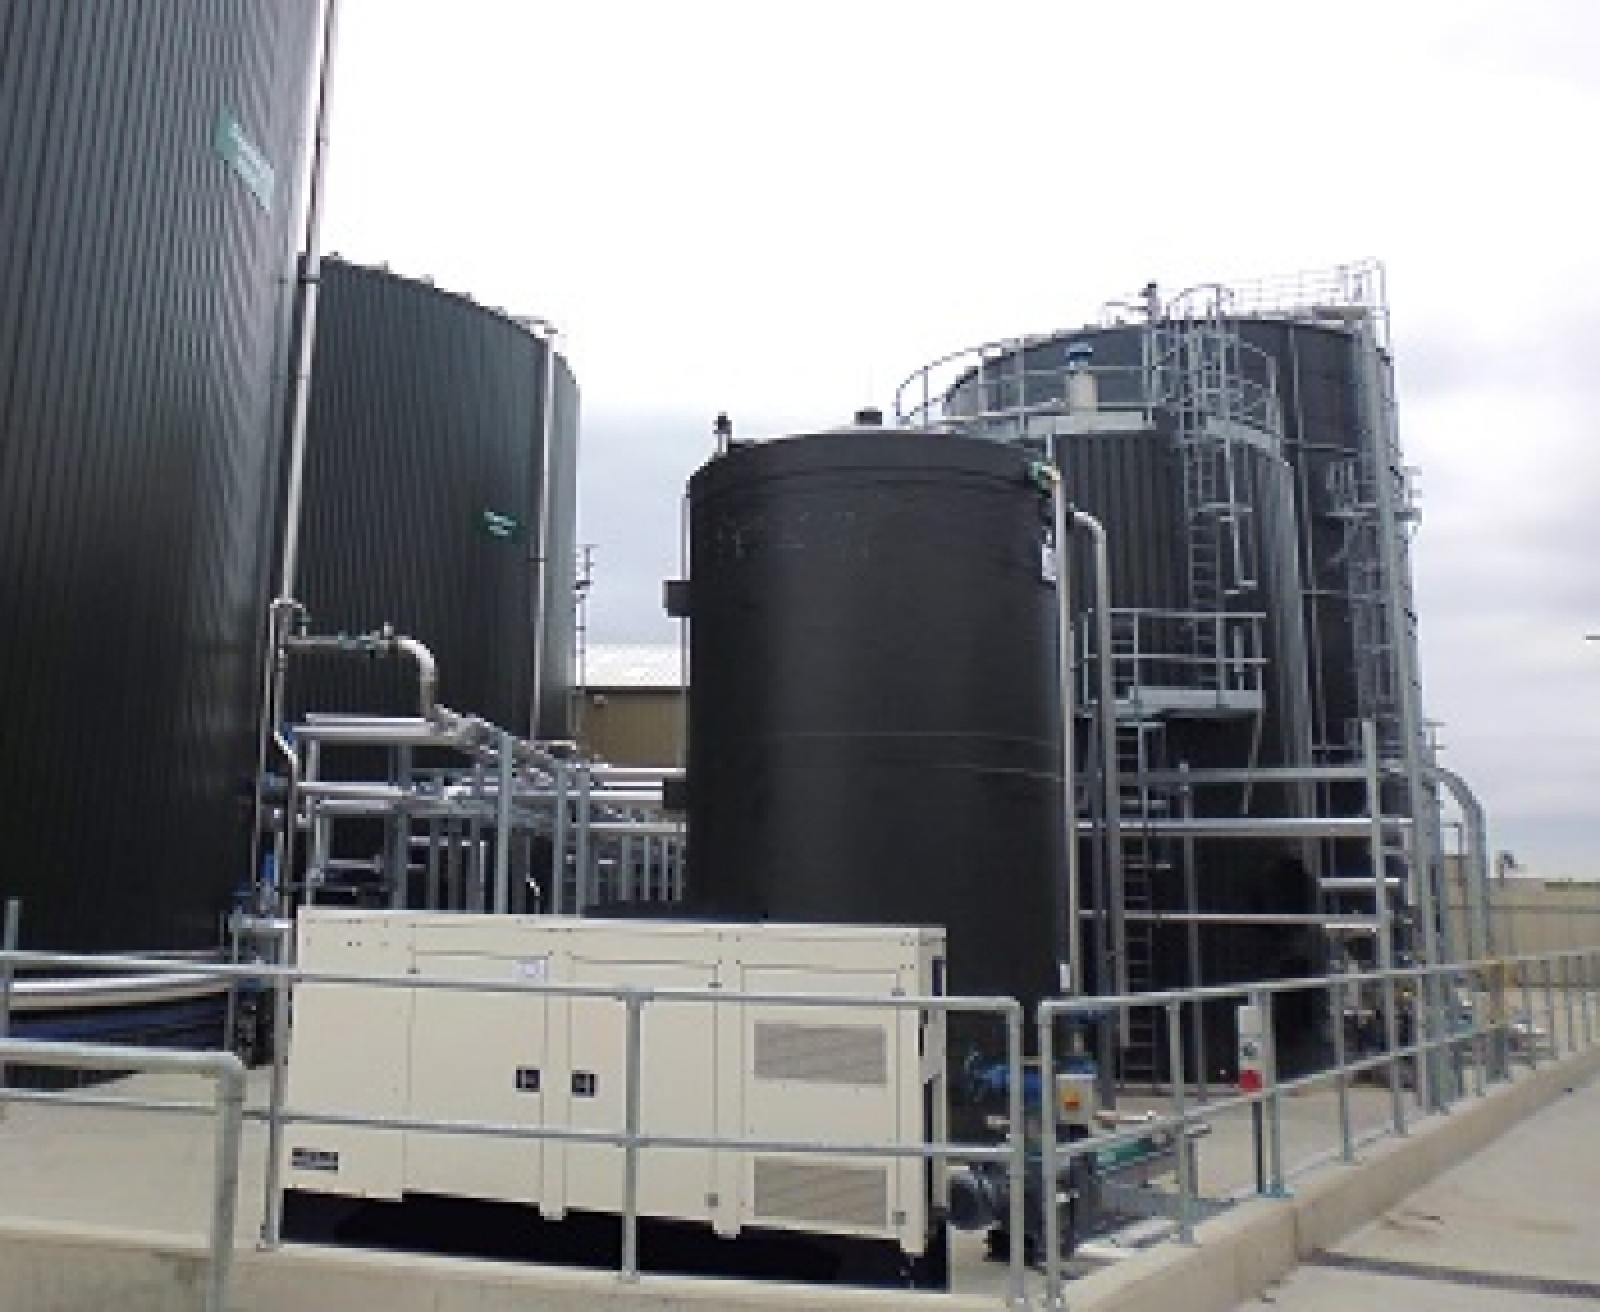 Balmoral Tanks expands with pipework acquisition